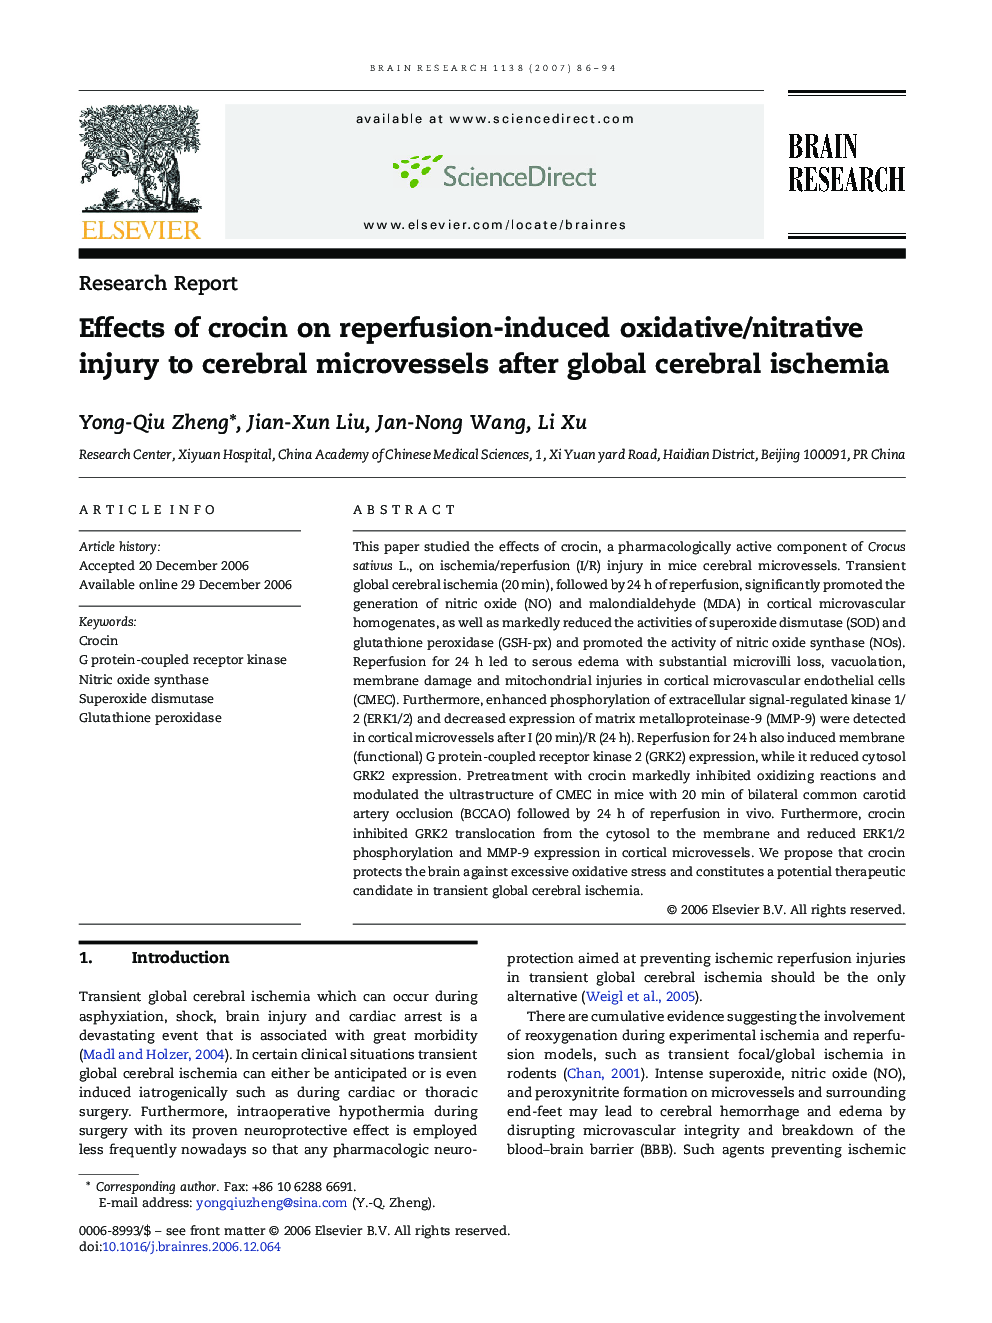 Effects of crocin on reperfusion-induced oxidative/nitrative injury to cerebral microvessels after global cerebral ischemia